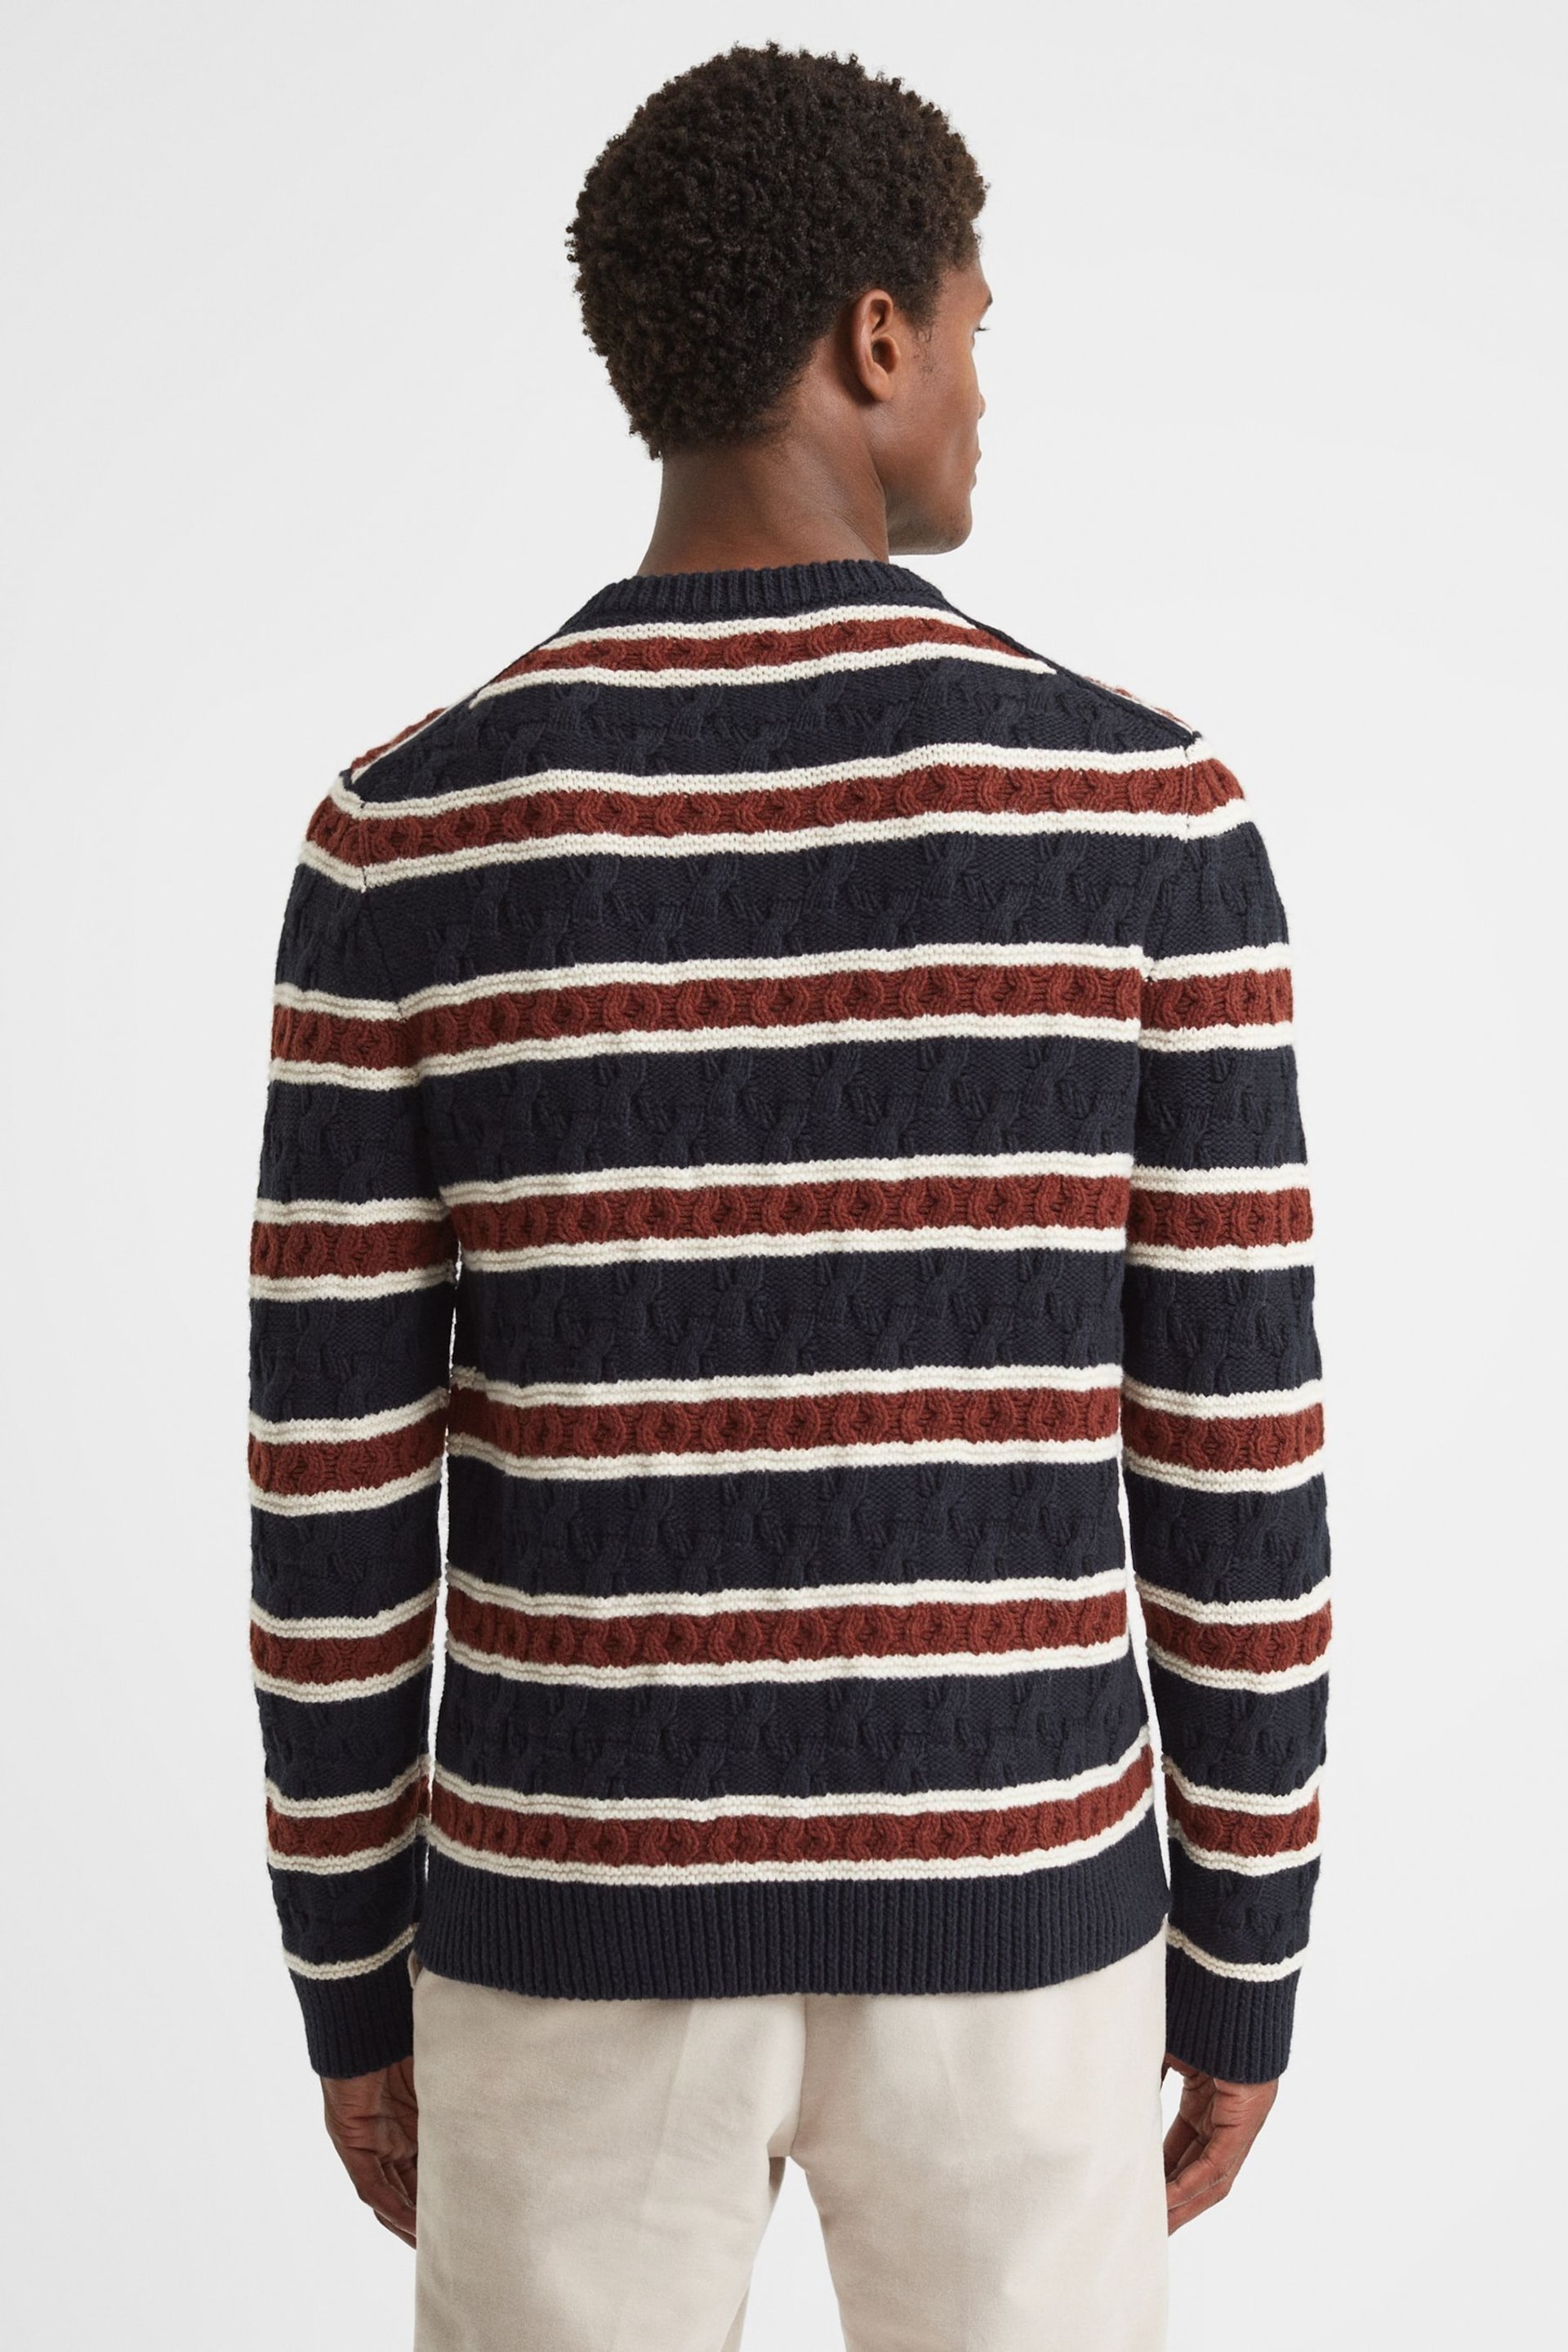 Reiss Tobacco Littleton Cable Knitted Striped Jumper - Image 5 of 6